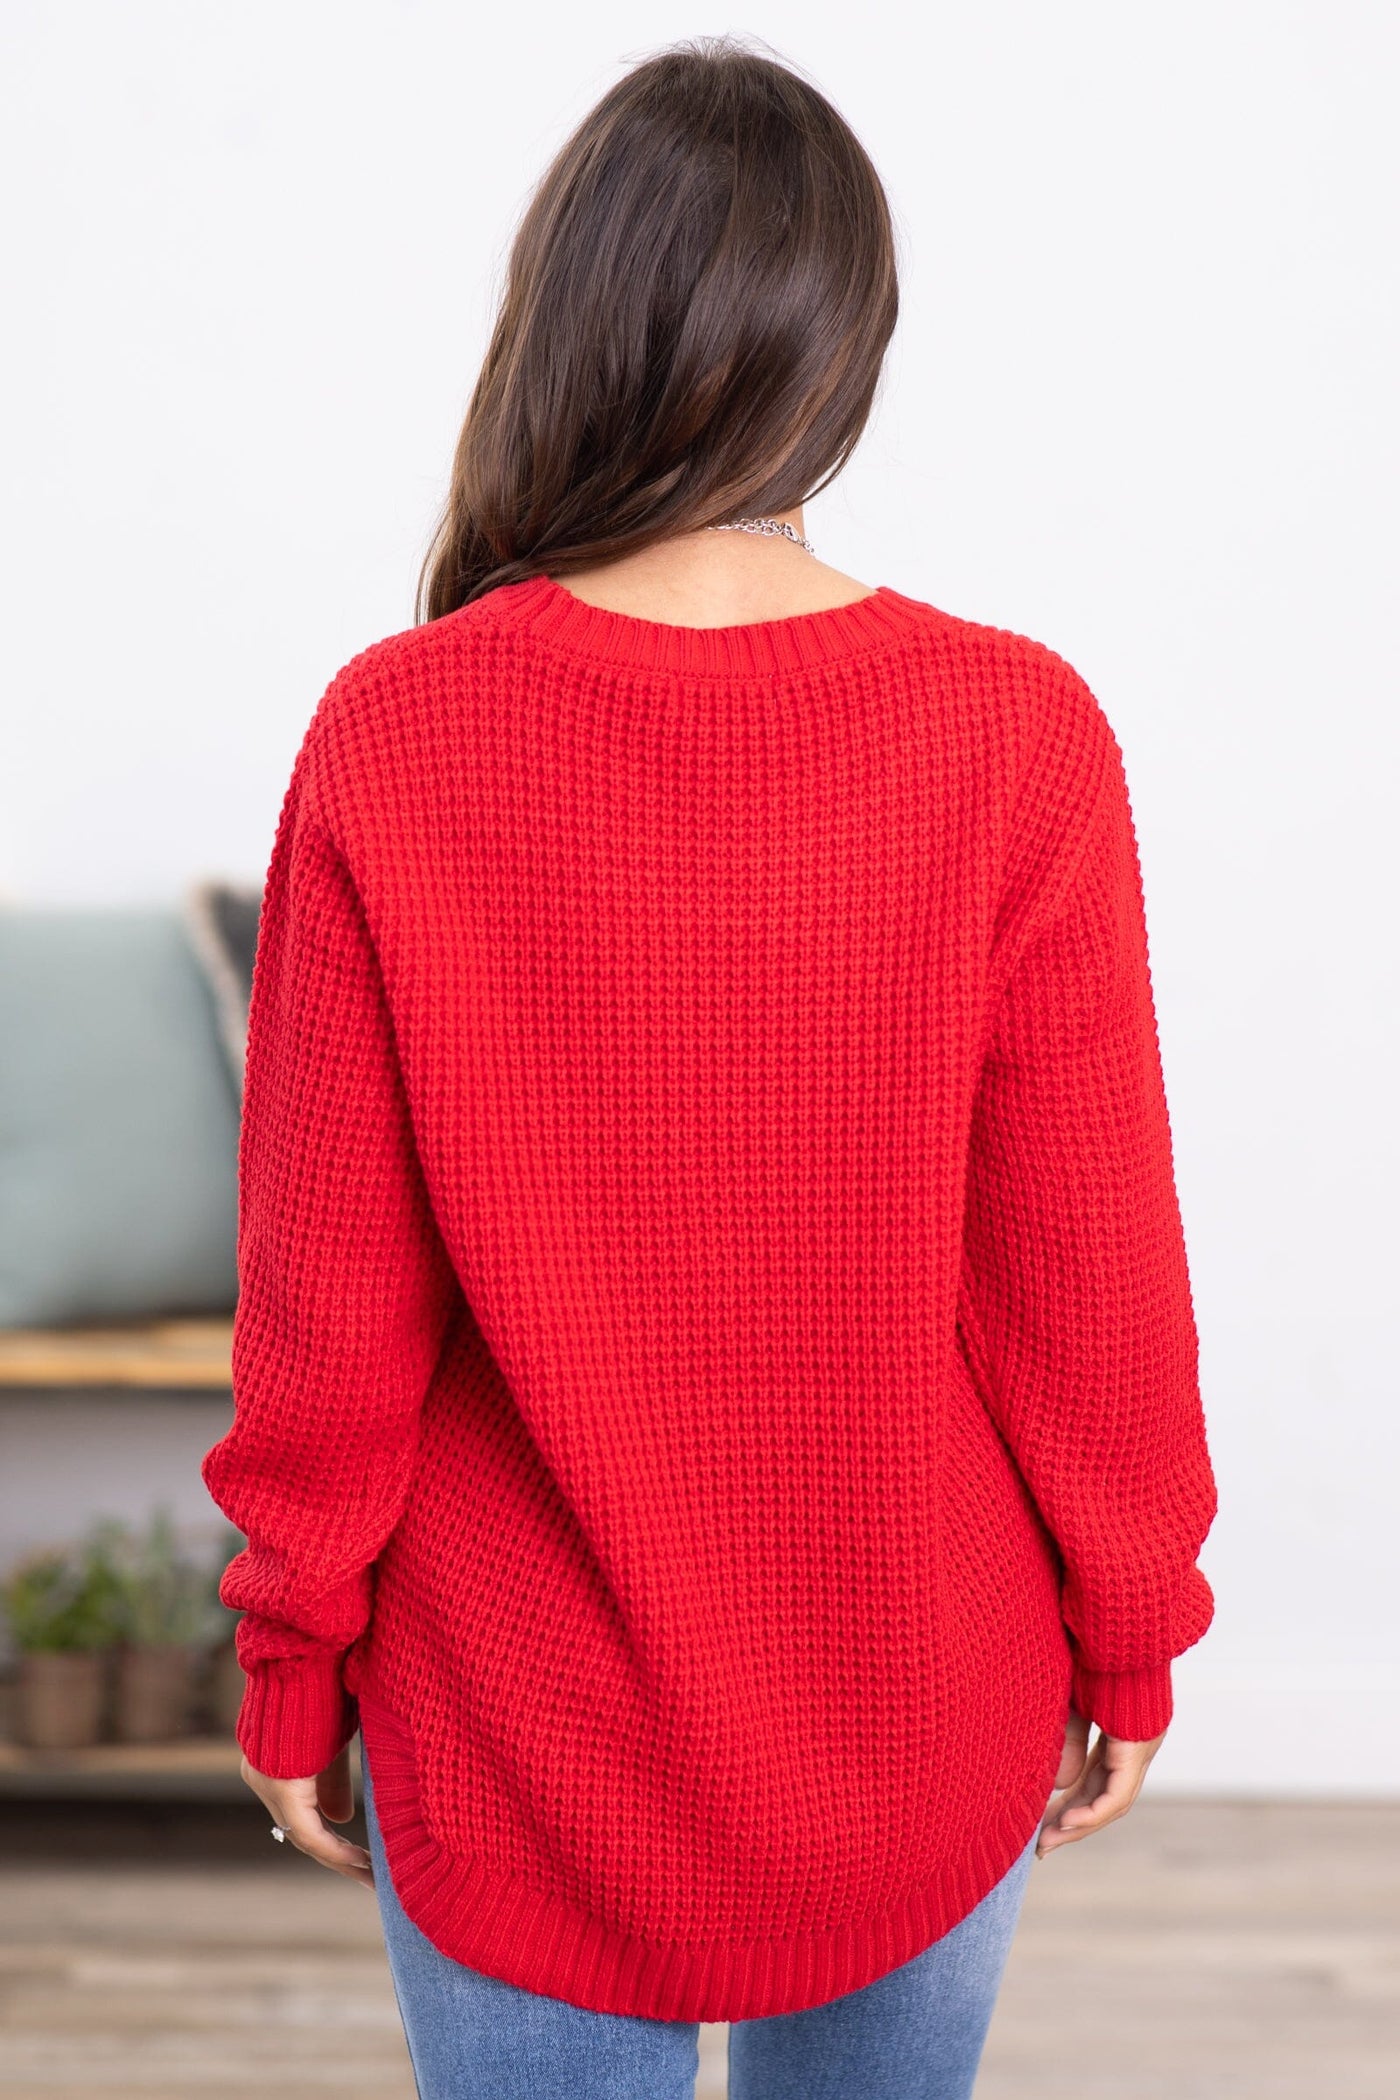 Red Waffle Knit Round Hem Sweater - Filly Flair